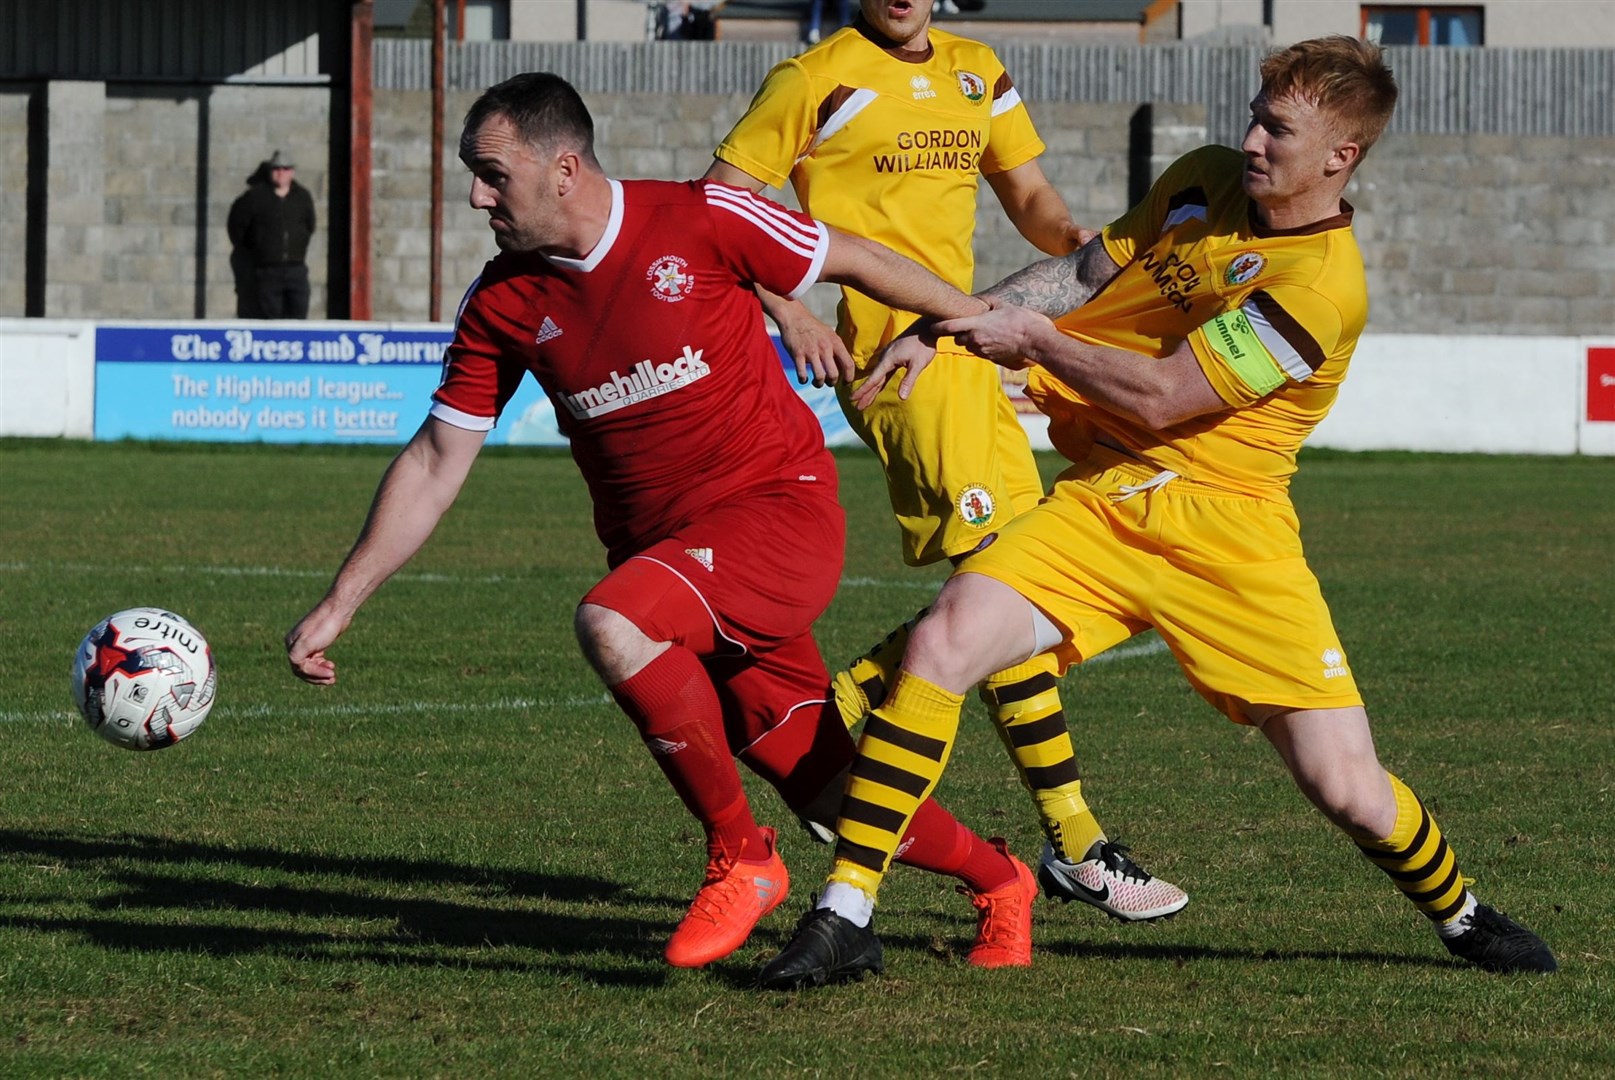 Shawn Scott in action during his Lossiemouth career.